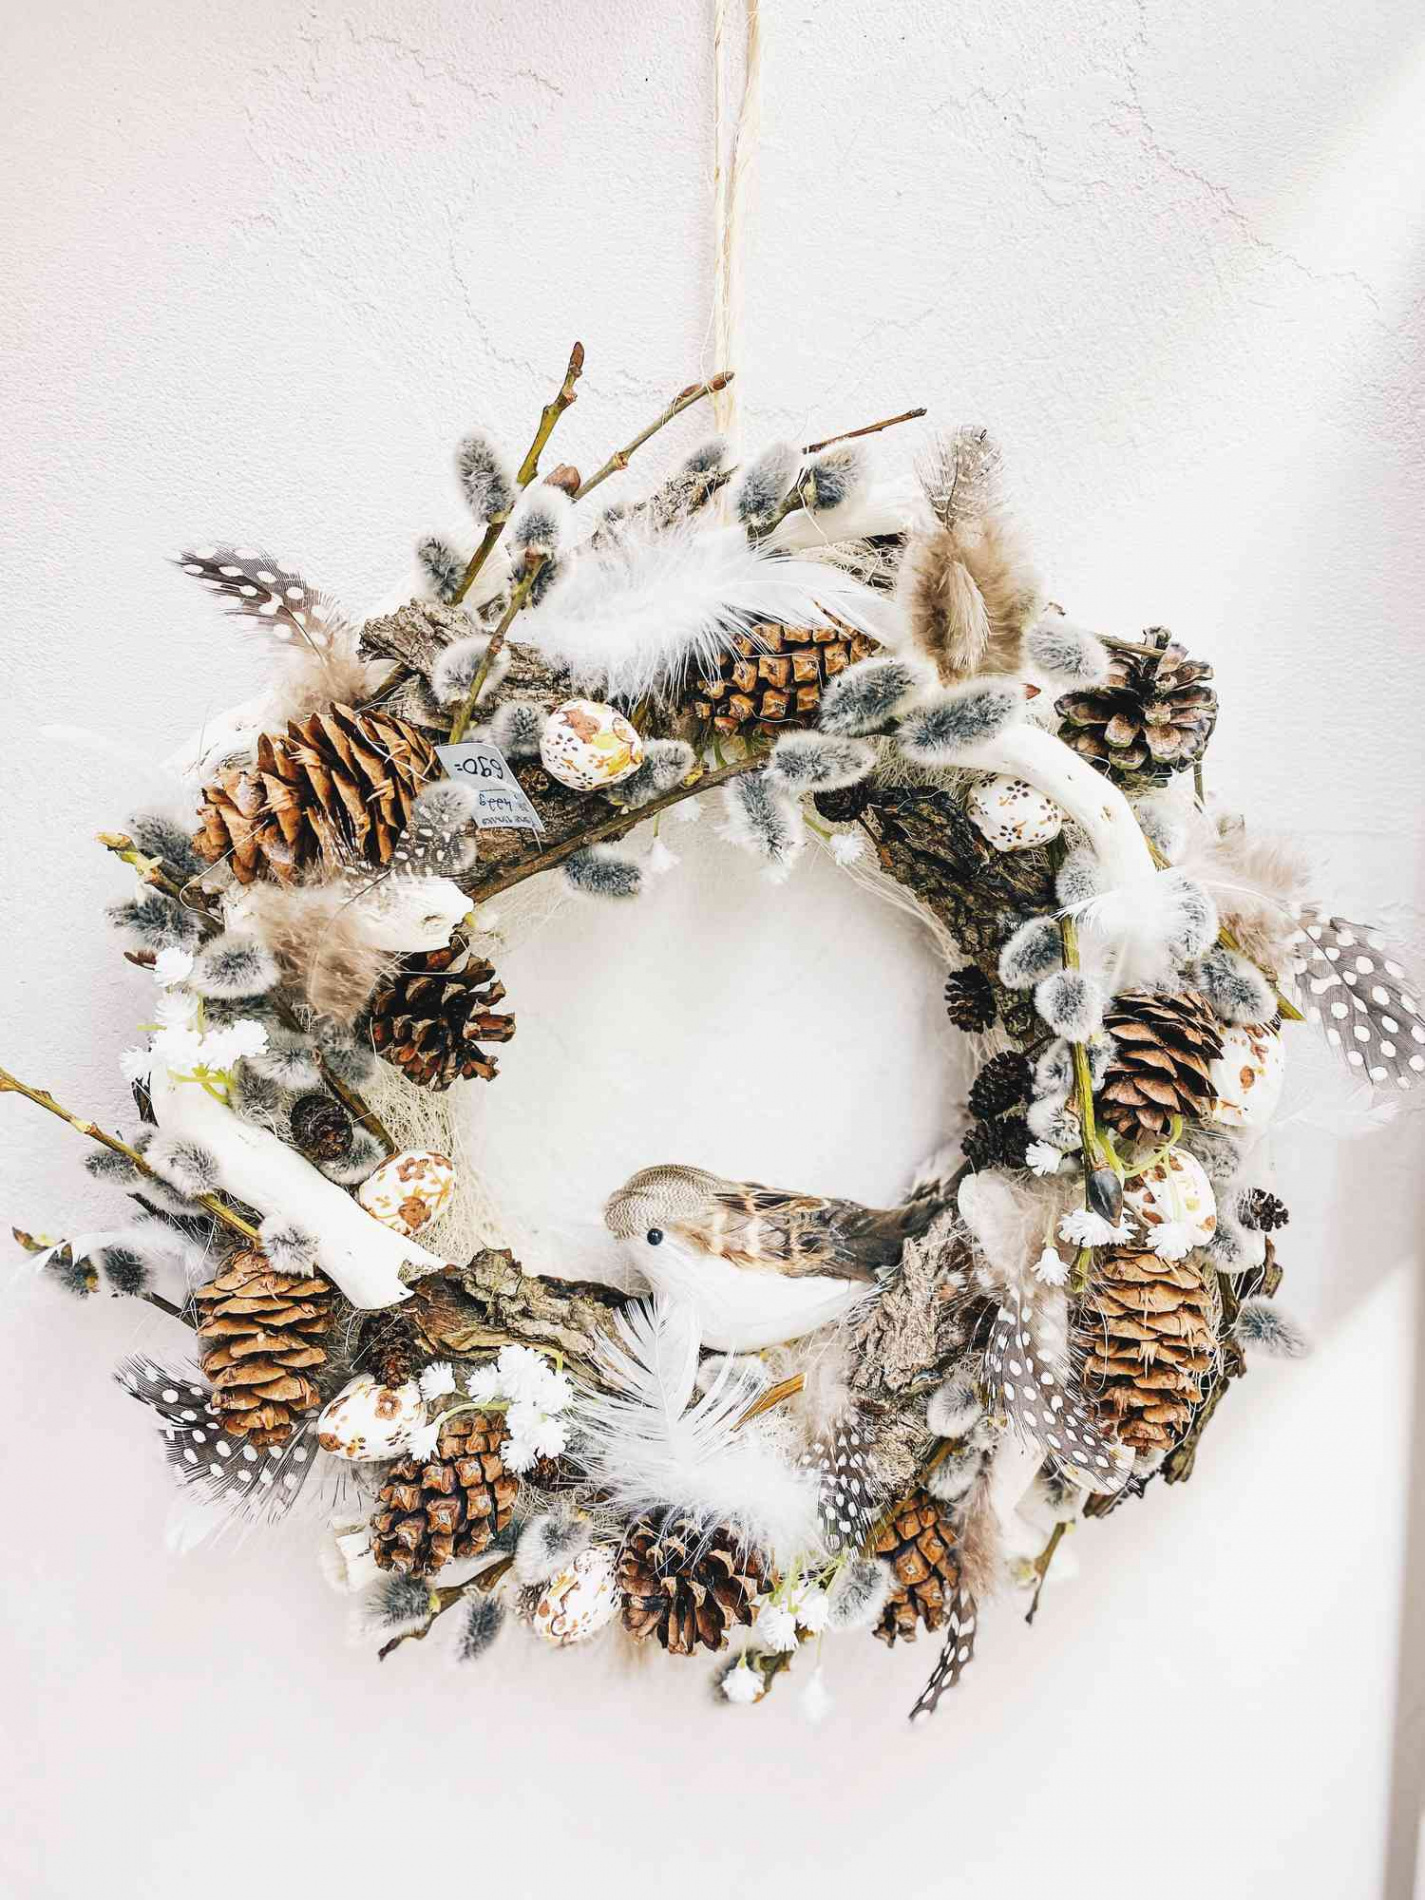 DIY Winter Wreaths to Make Your Home More Festive